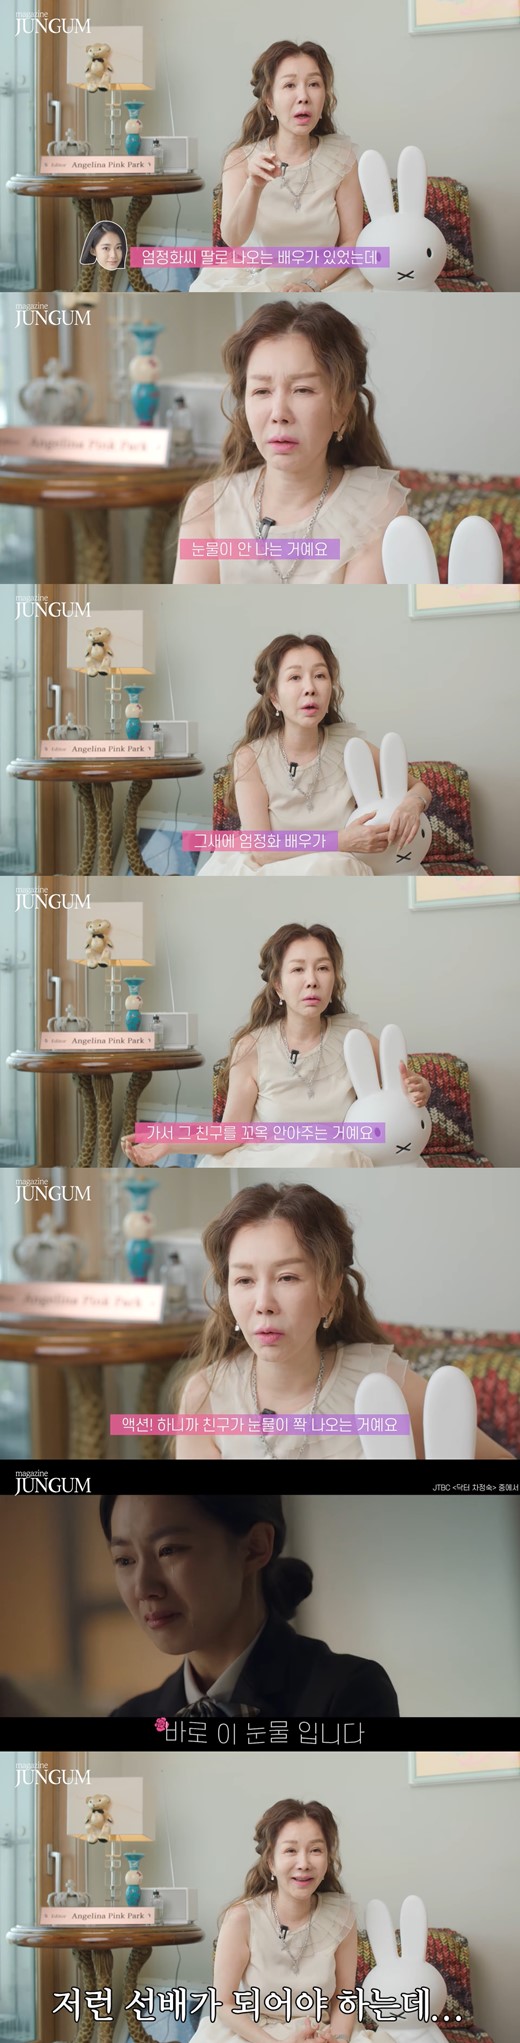 Actor Park Jun-geum Dr. Cha Jeong-suk! Actor Uhm Jung-hwa, who was filming, told the story.On Wednesday, Park Jun-geums YouTube channel posted a video titled Dr. Cha Jeong-suk! behind-the-scenes sledding [magazine quasi-gold].Current comprehensive channel JTBC Saturday drama Dr. Park Jun-geum, who appeared in Cha Jeong-suk! I was delighted with the performance of the work, I feel like I love you as much as I expected. Dr. Cha Jeong-suk! About the role of mother-in-law in the Cha Jeong-suk! There are a lot of comedies, of course.Kim Byeong-Cheol, who plays my sons role, is a good comedian, so I really thought that my hands and feet were right. Before we left, our Uhm Jung-hwa junior contacted me.I watched the first and second episodes, and Kim Byeong-Cheol and my comedy told me that I saved a lot of drama.I felt so good, but after I hung up the phone, Uhm Jung-hwa was always talking about good things, but I thought it would be right or wrong. Dr. Cha Jeong-suk!Kim Byeong-Cheol and I, the bishop, did a lot of research and solved a lot of comedy in the field because we thought that we could be bored if we went too far.So if the comedy is 1 in the script, we have expressed 5-6. When asked about the most memorable scene, he replied, Just as every god is like a child to me, just as every finger bites and doesnt hurt. Ive done my best and Ive expressed everything in my line, so I dont think theres a god that any god would abandon.Park Jun-geum also said, There was an actor who appeared as Uhm Jung-hwas daughter, and there was a scene where Kim Byeong-Cheol was very angry because he did not want to do it.Park Jun-geum said, Its a scene where an actor has to cry, but I can not cry. Its not because he lacks the ability of the actor, but because he is a person.Some days I get tears, but some days I dont, he said. It seemed like it would take a long time. And I didnt think the director would just pass by because he also needed a drop of tears.I do not want to put eyedrops. I also had such an experience, and when I did, I just told him that I wanted to poke my eyes.Park Jun-geum said, The actor Uhm Jung-hwa went and hugged the friend. I was tearful when I saw it.I hugged him for 20 seconds and said, Action, and his friend tears came out. I really had to be such a senior. I saw the warm heart of Uhm Jung-hwa actor.